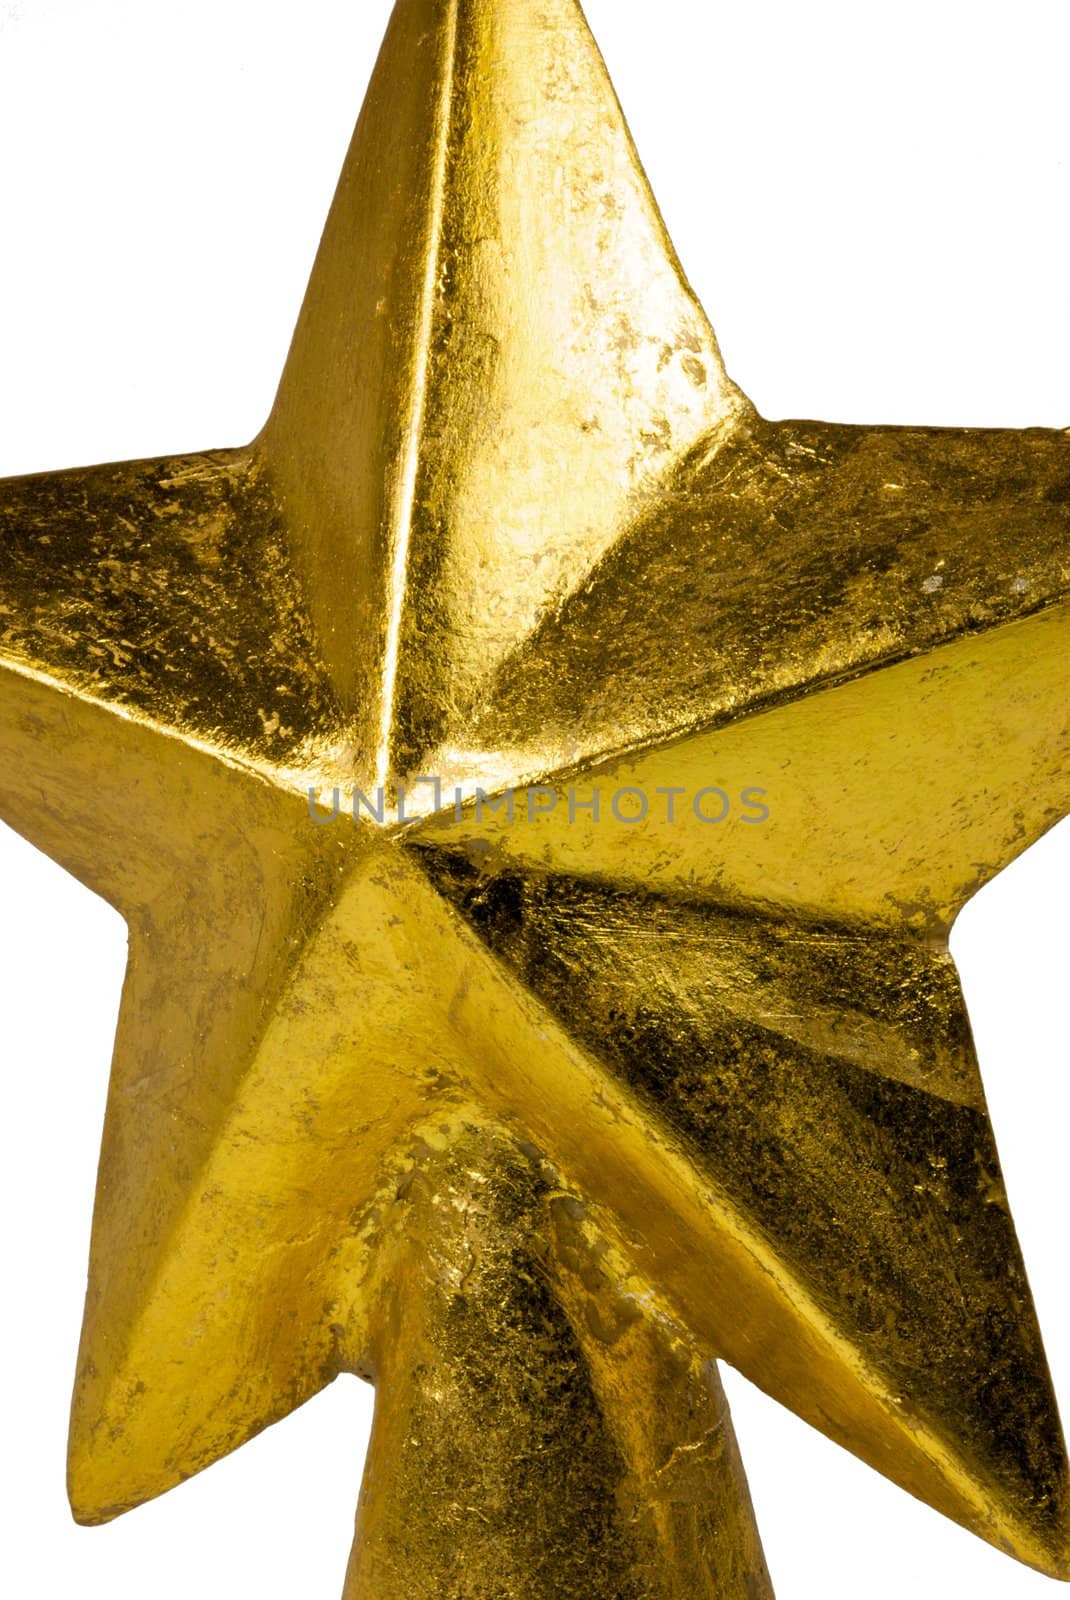 An isolated, metallic golden Christmas tree star in a vertical format